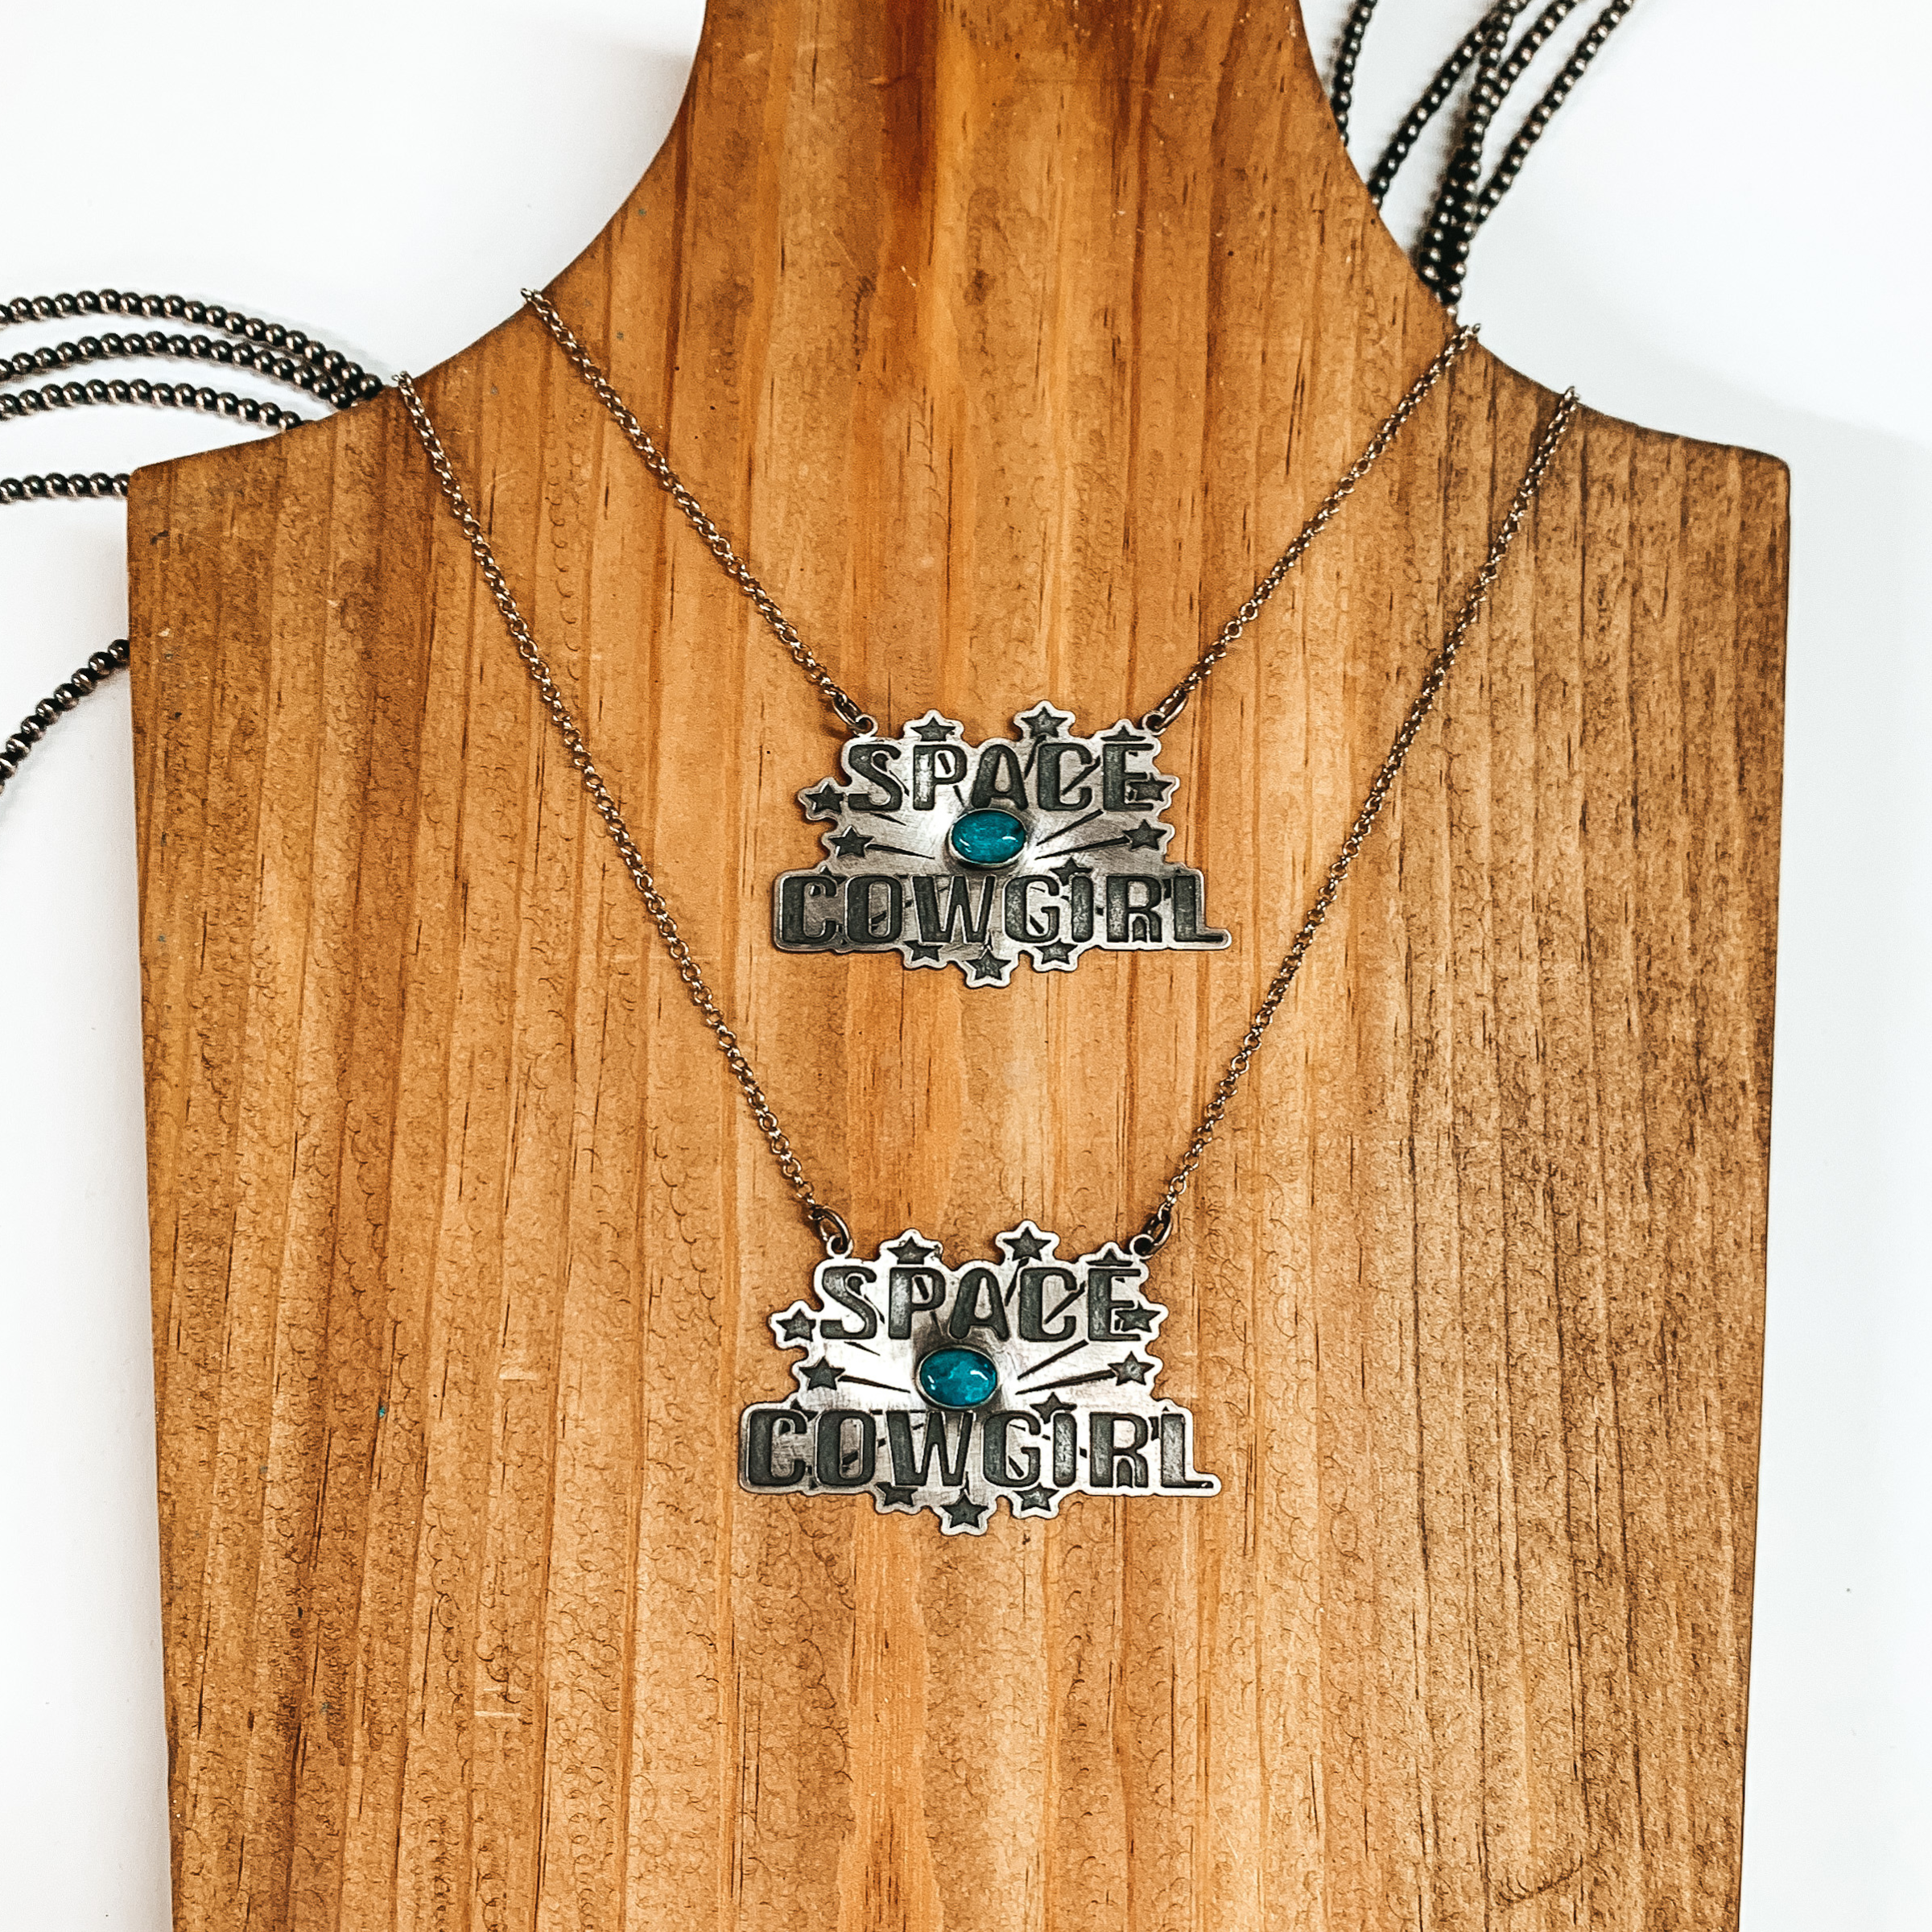 Silver chain necklace with a silver pendant and small turquoise stone. The silver pendant has the words "SPACE COWGIRL" engrave on it with stars surrounding it. This necklace is pictured on a wood block on a white background. 